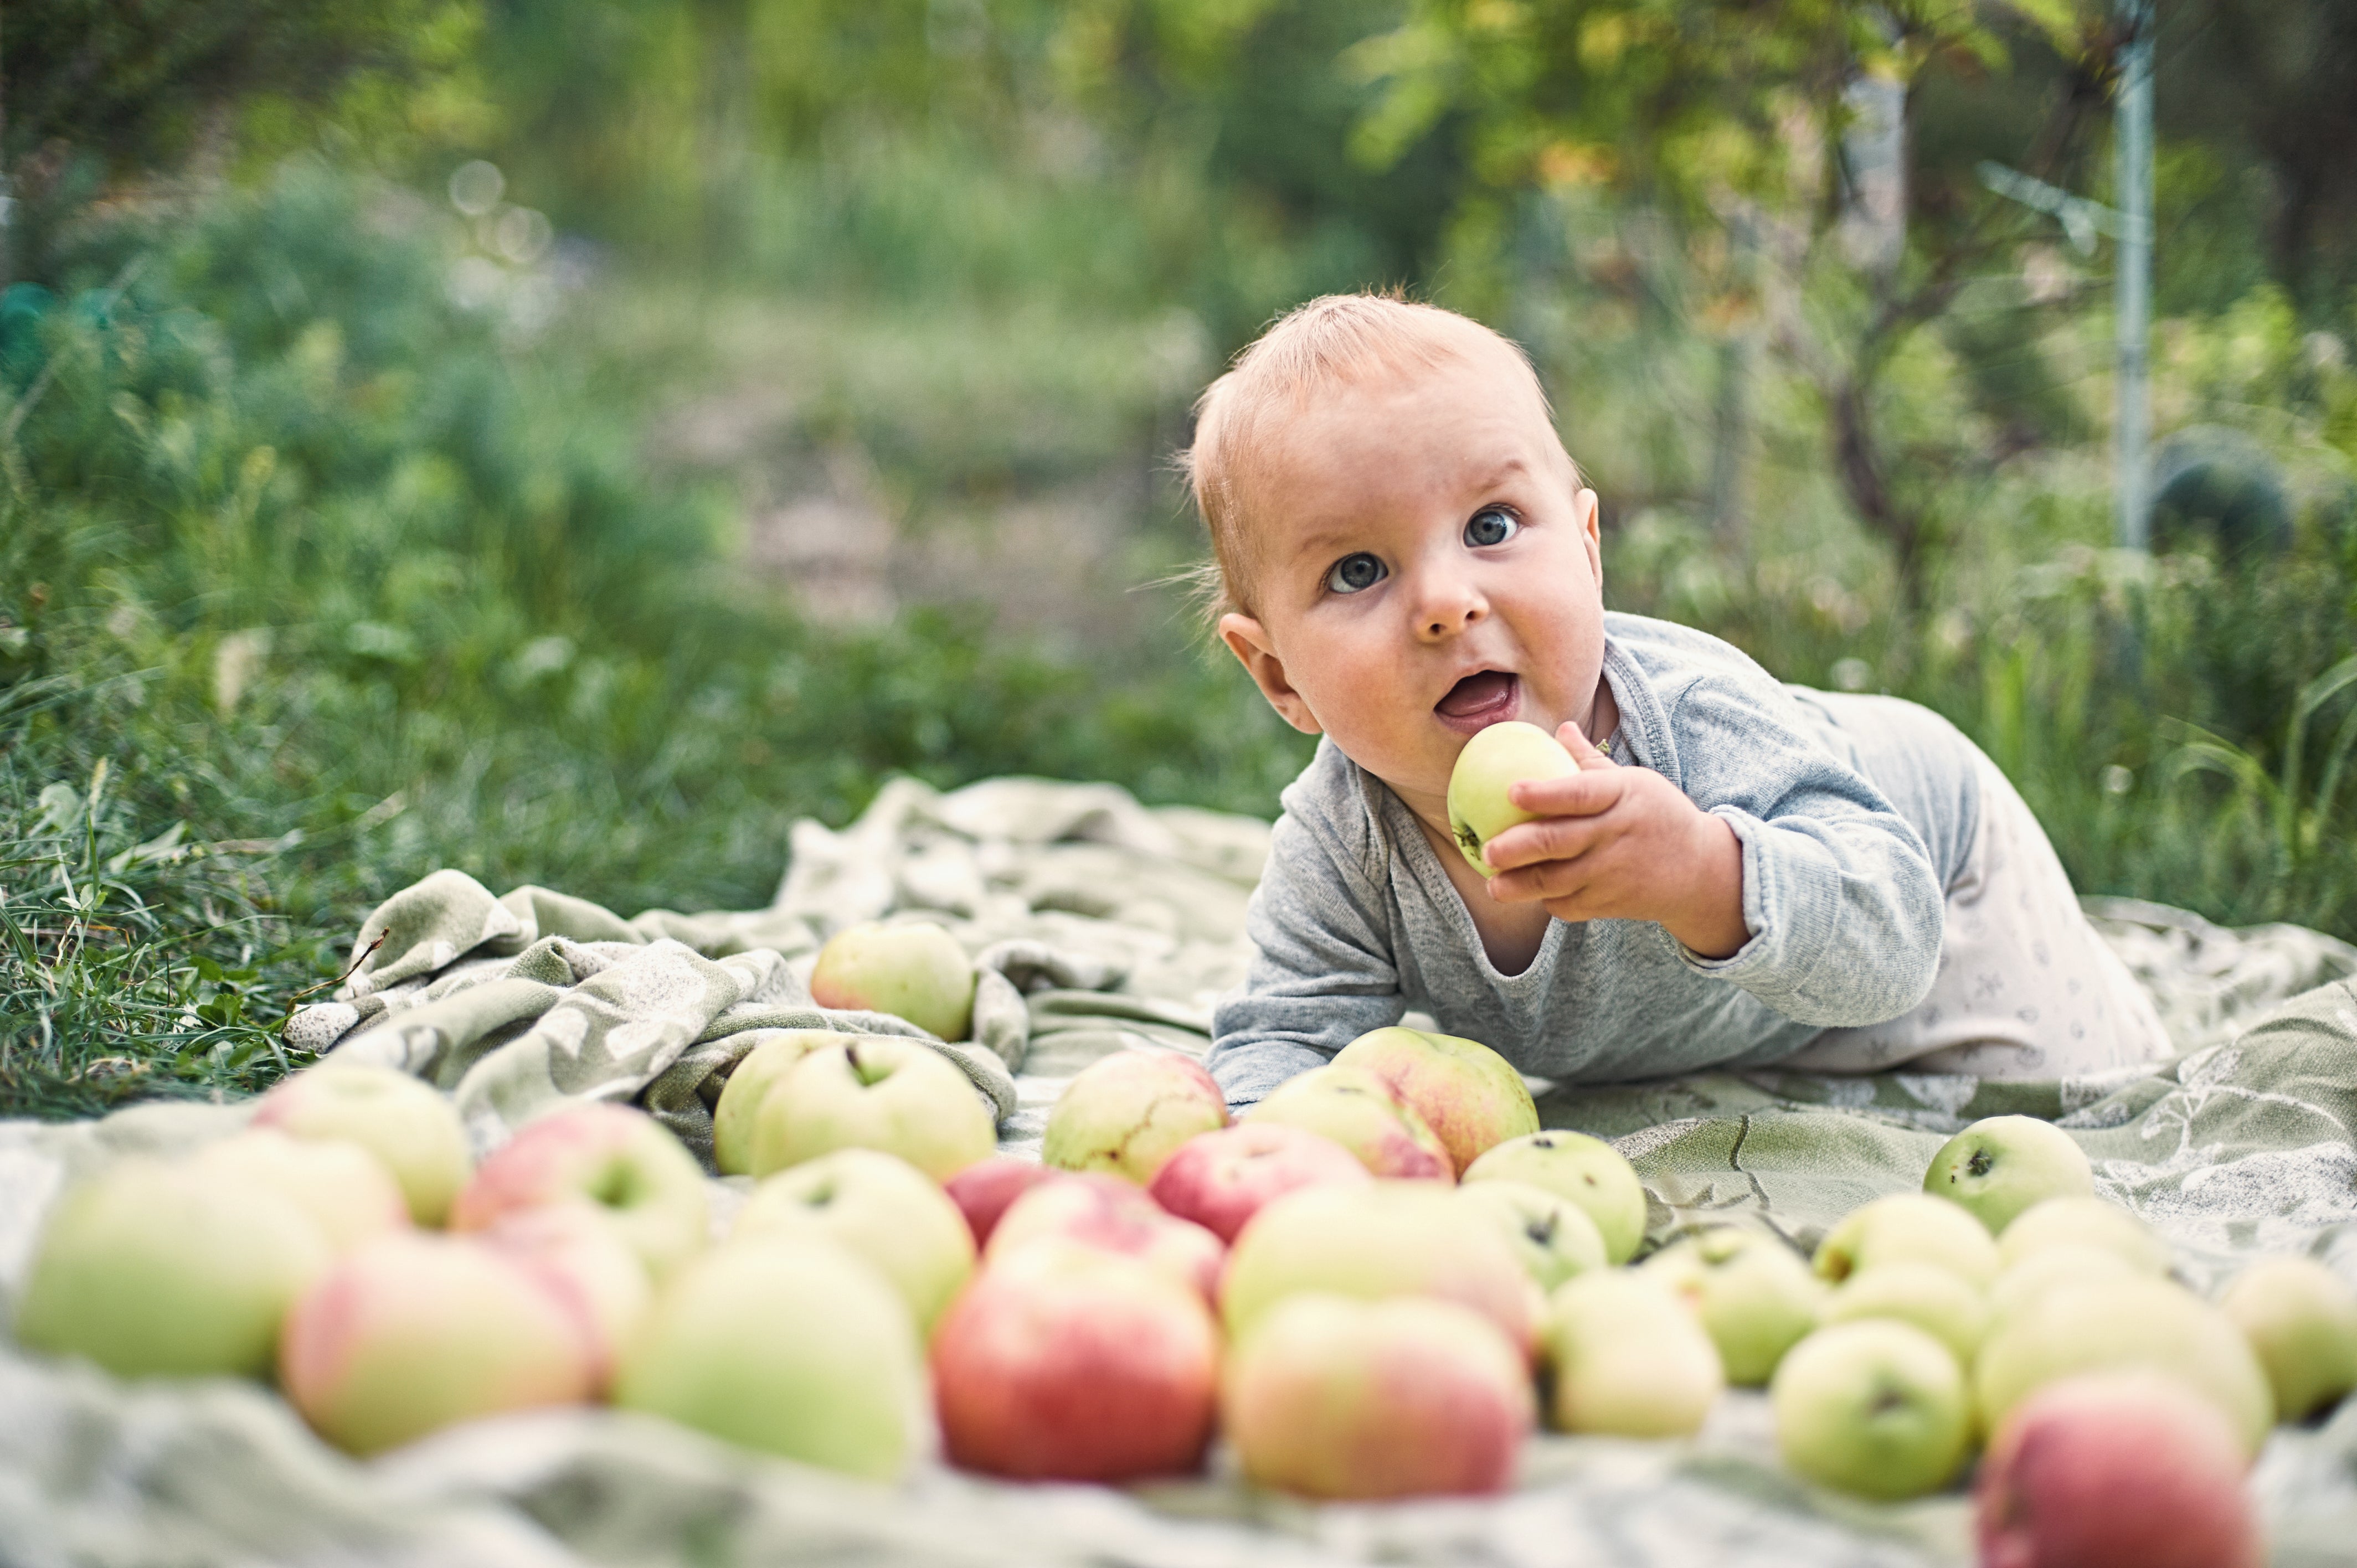 A baby in a garden eating an apple and surrounded by dozens of apples on a picnic blanket. Apples are great first foods for babies.